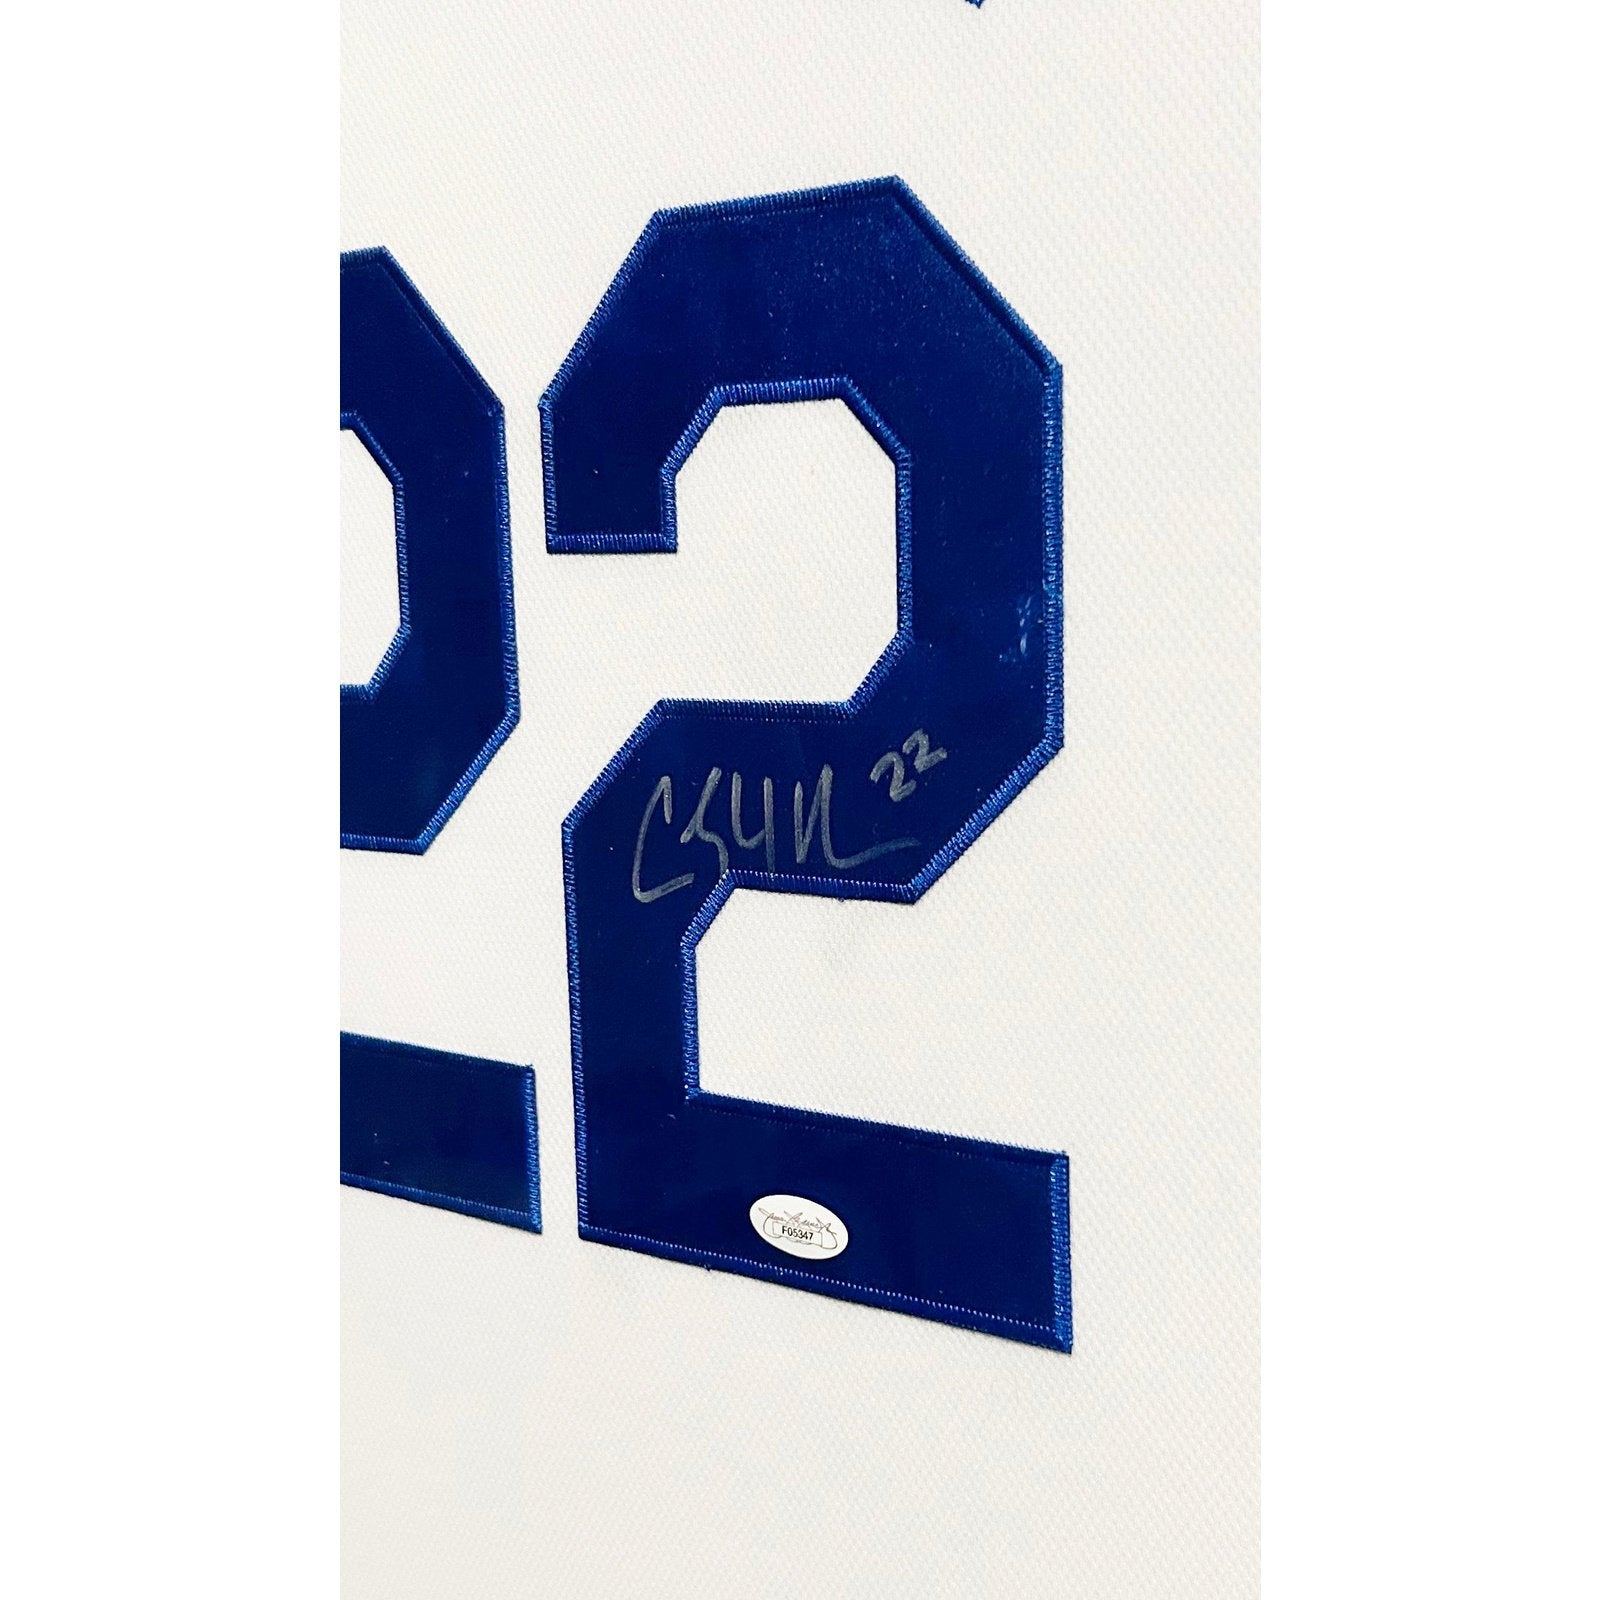 Clayton Kershaw Signed Framed Jersey Beckett Autographed LA Dodgers L.A.